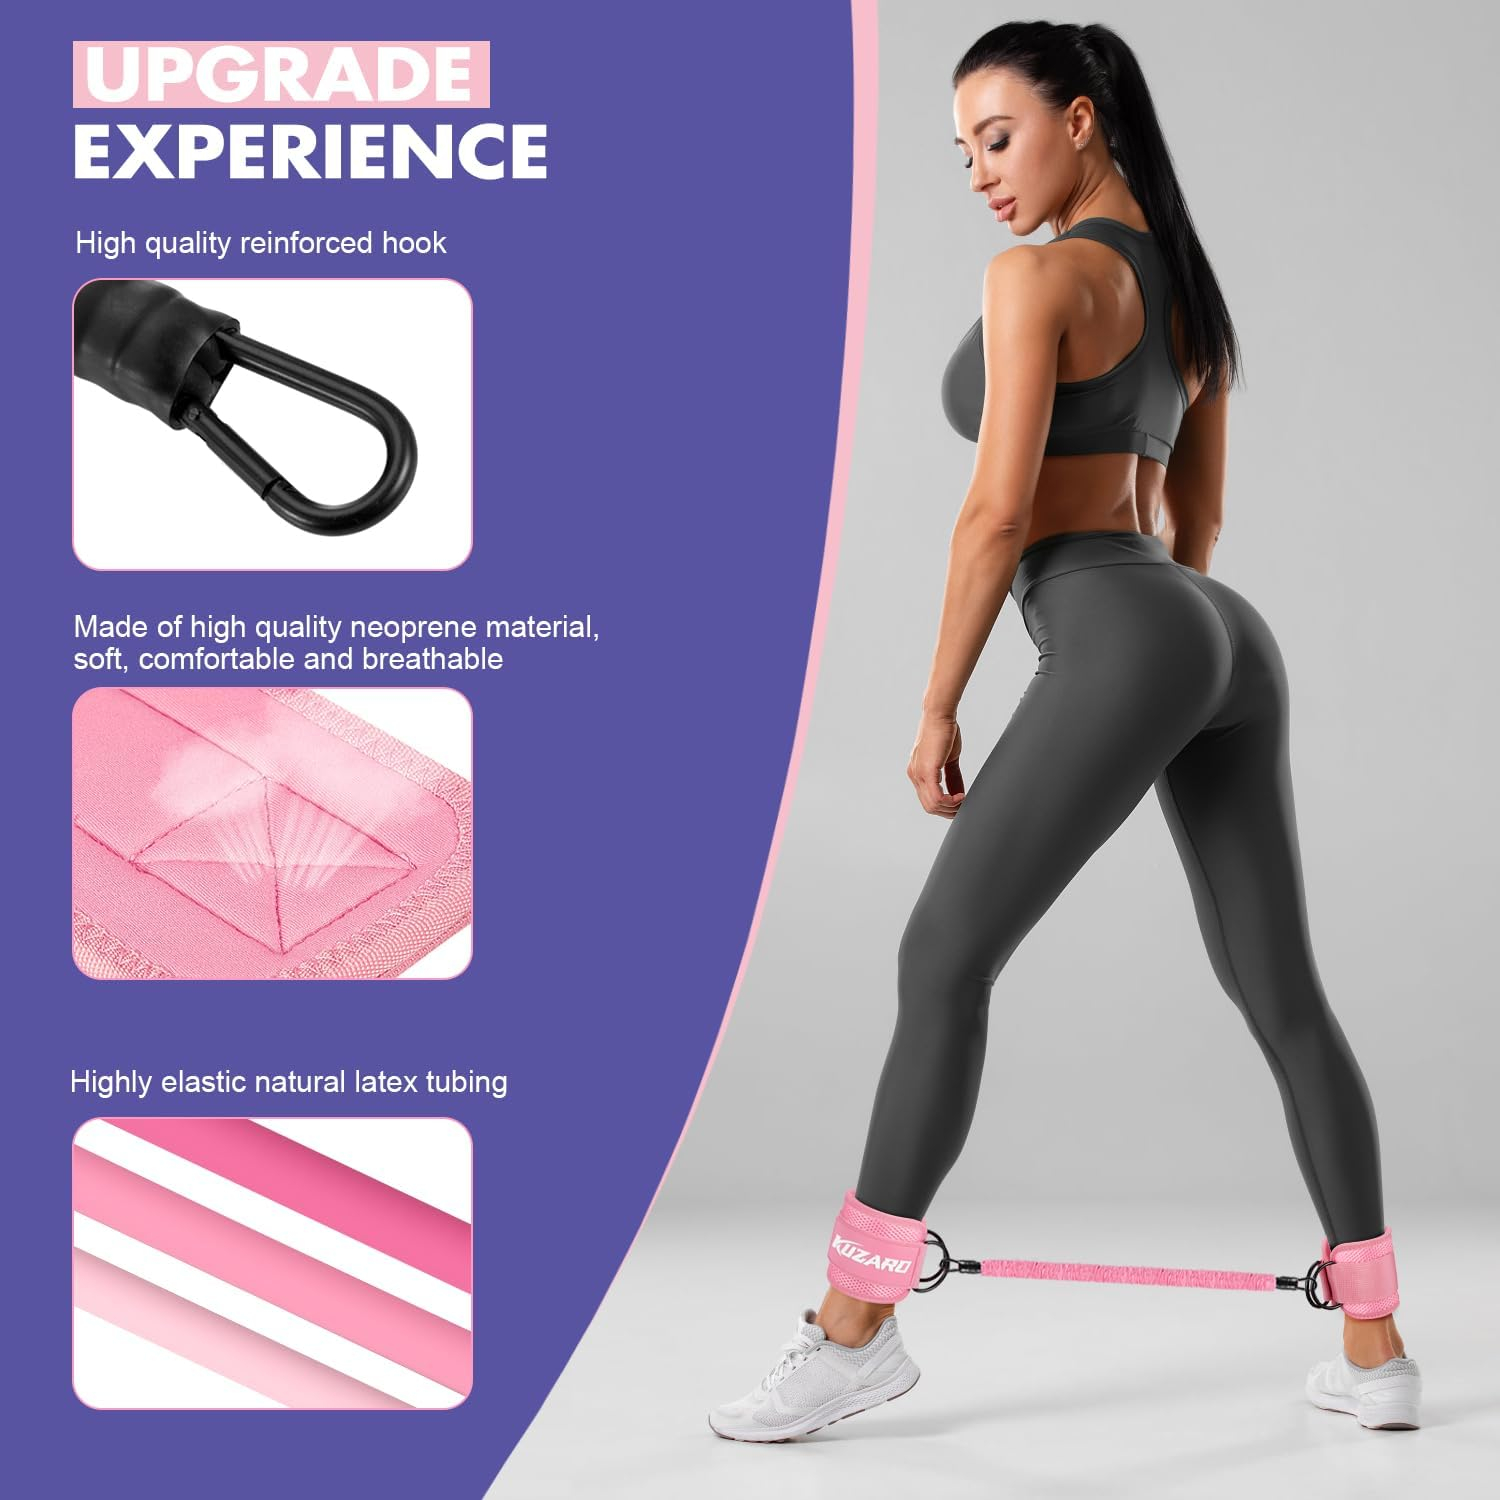 Resistance Band Set with Ankle Straps, Glutes Workout Equipment, Ankle Bands for Working Out, Butt Exercise Equipment for Women Legs and Glutes - Perfect for Home Workouts and Fitness Training